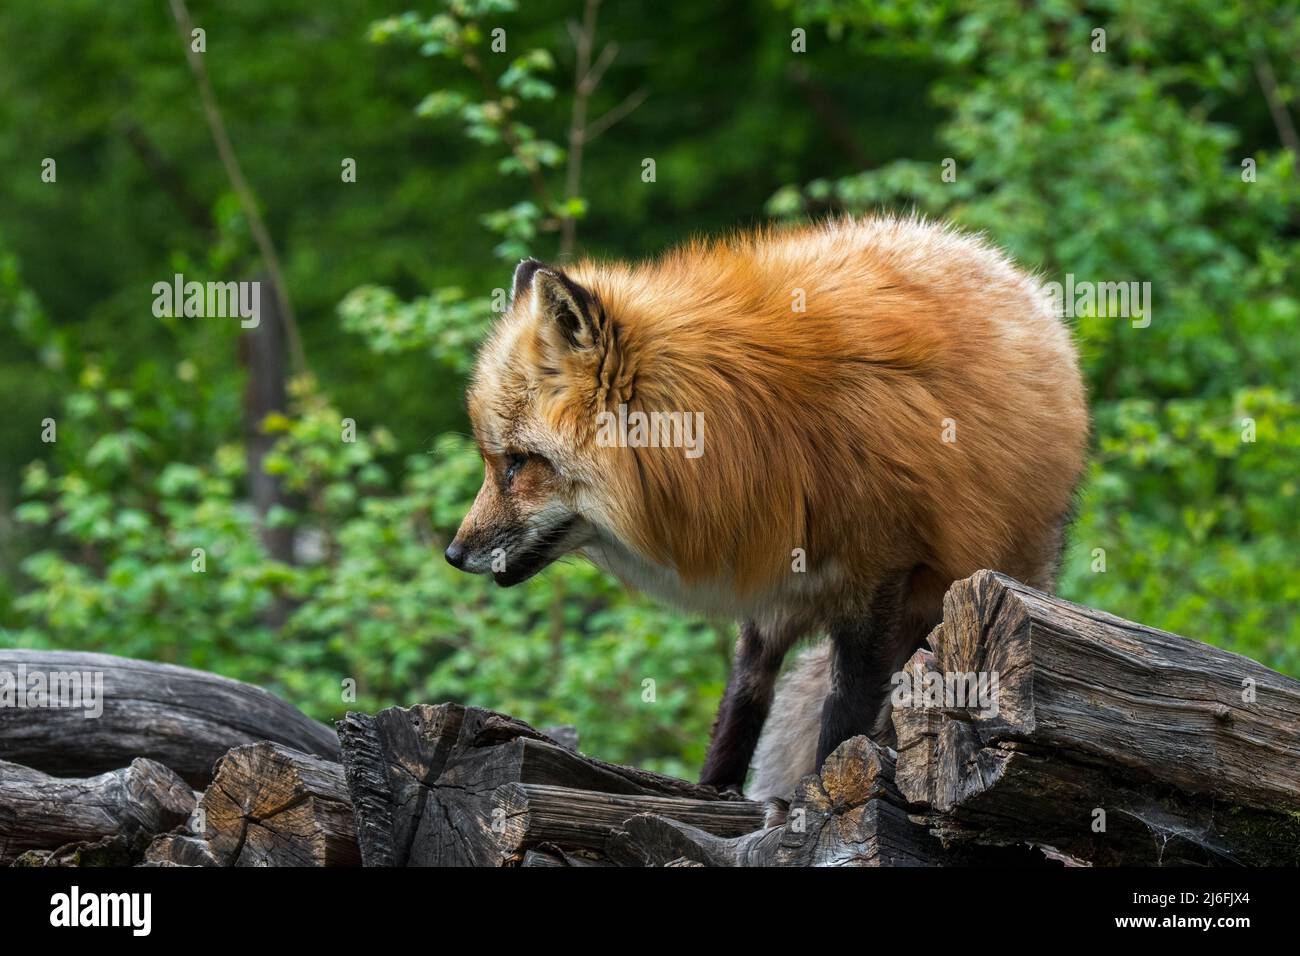 Red fox (Vulpes vulpes) in thick winter coat / fur on wood pile at forest's edge in spring Stock Photo